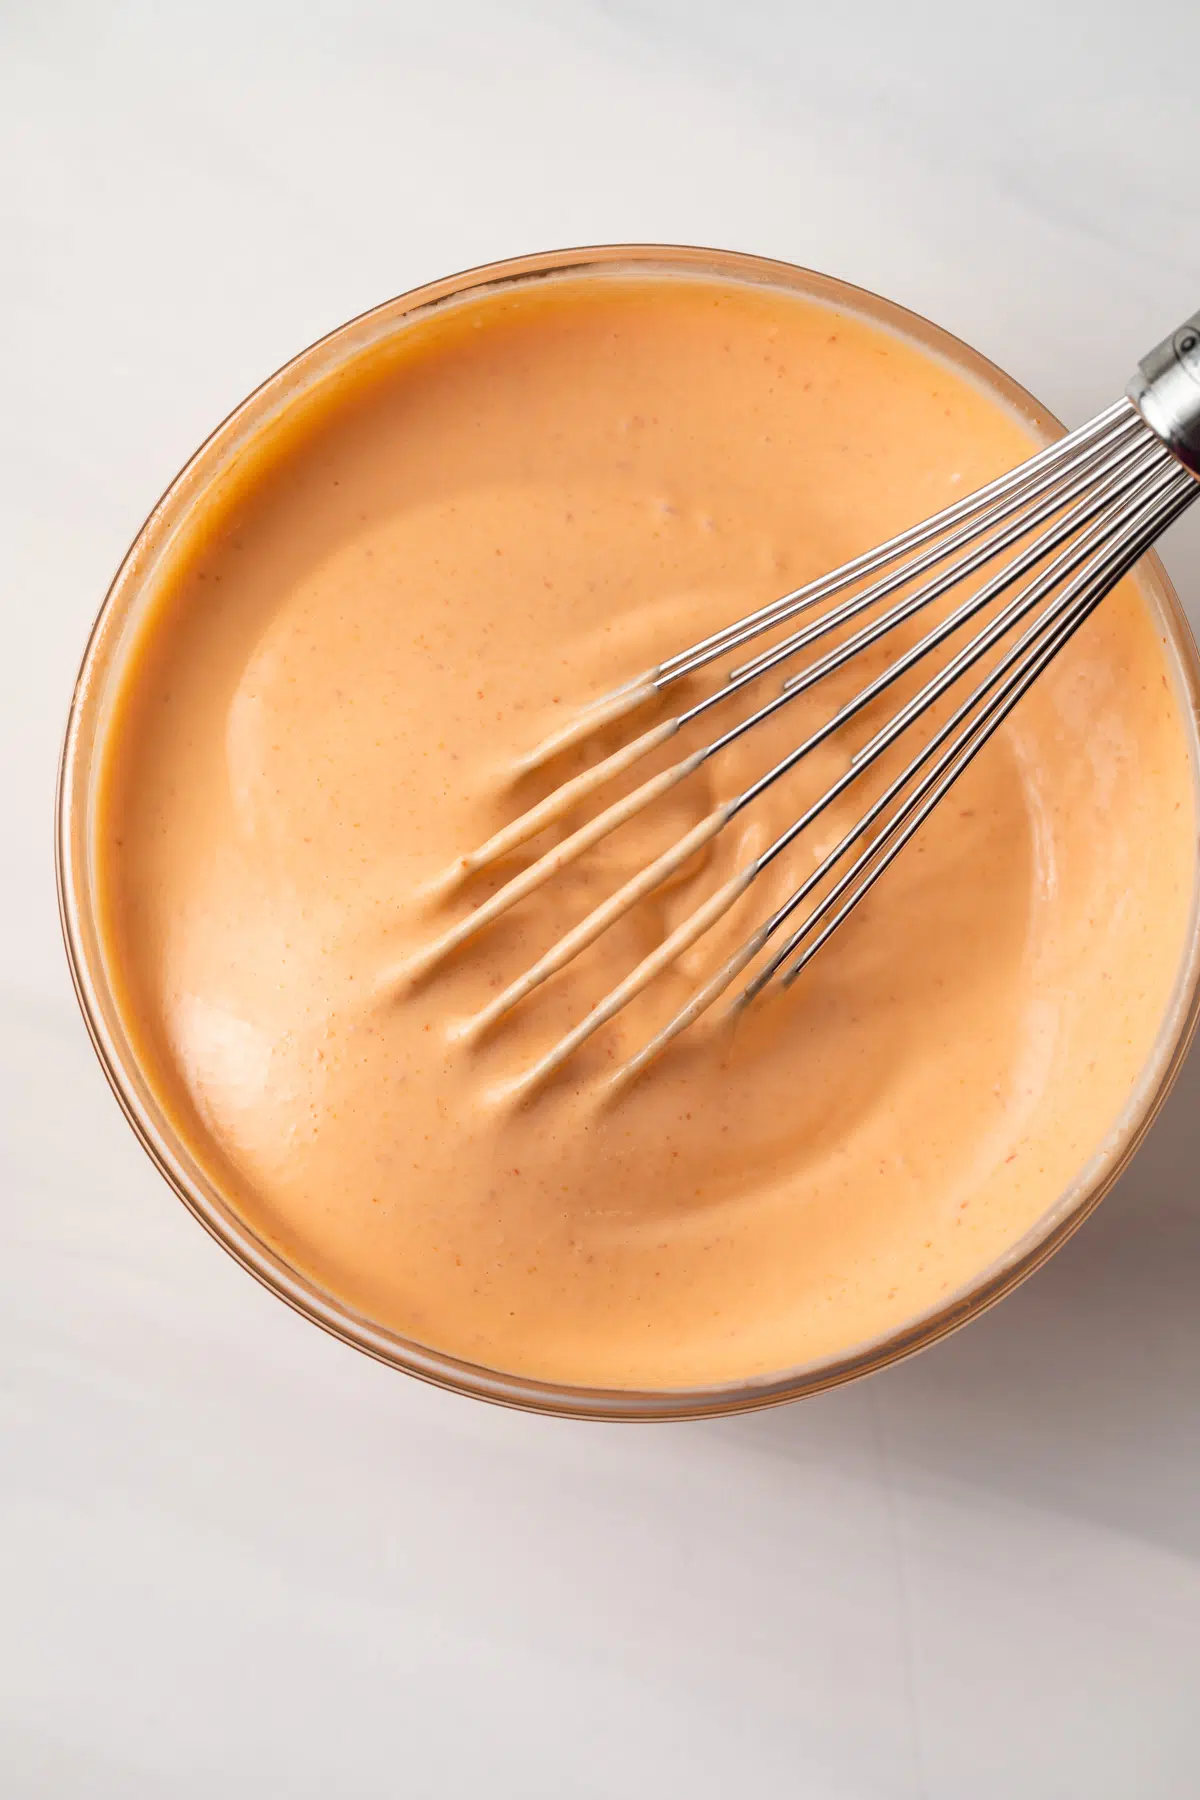 Sriracha mayo in glass bowl with whisk.